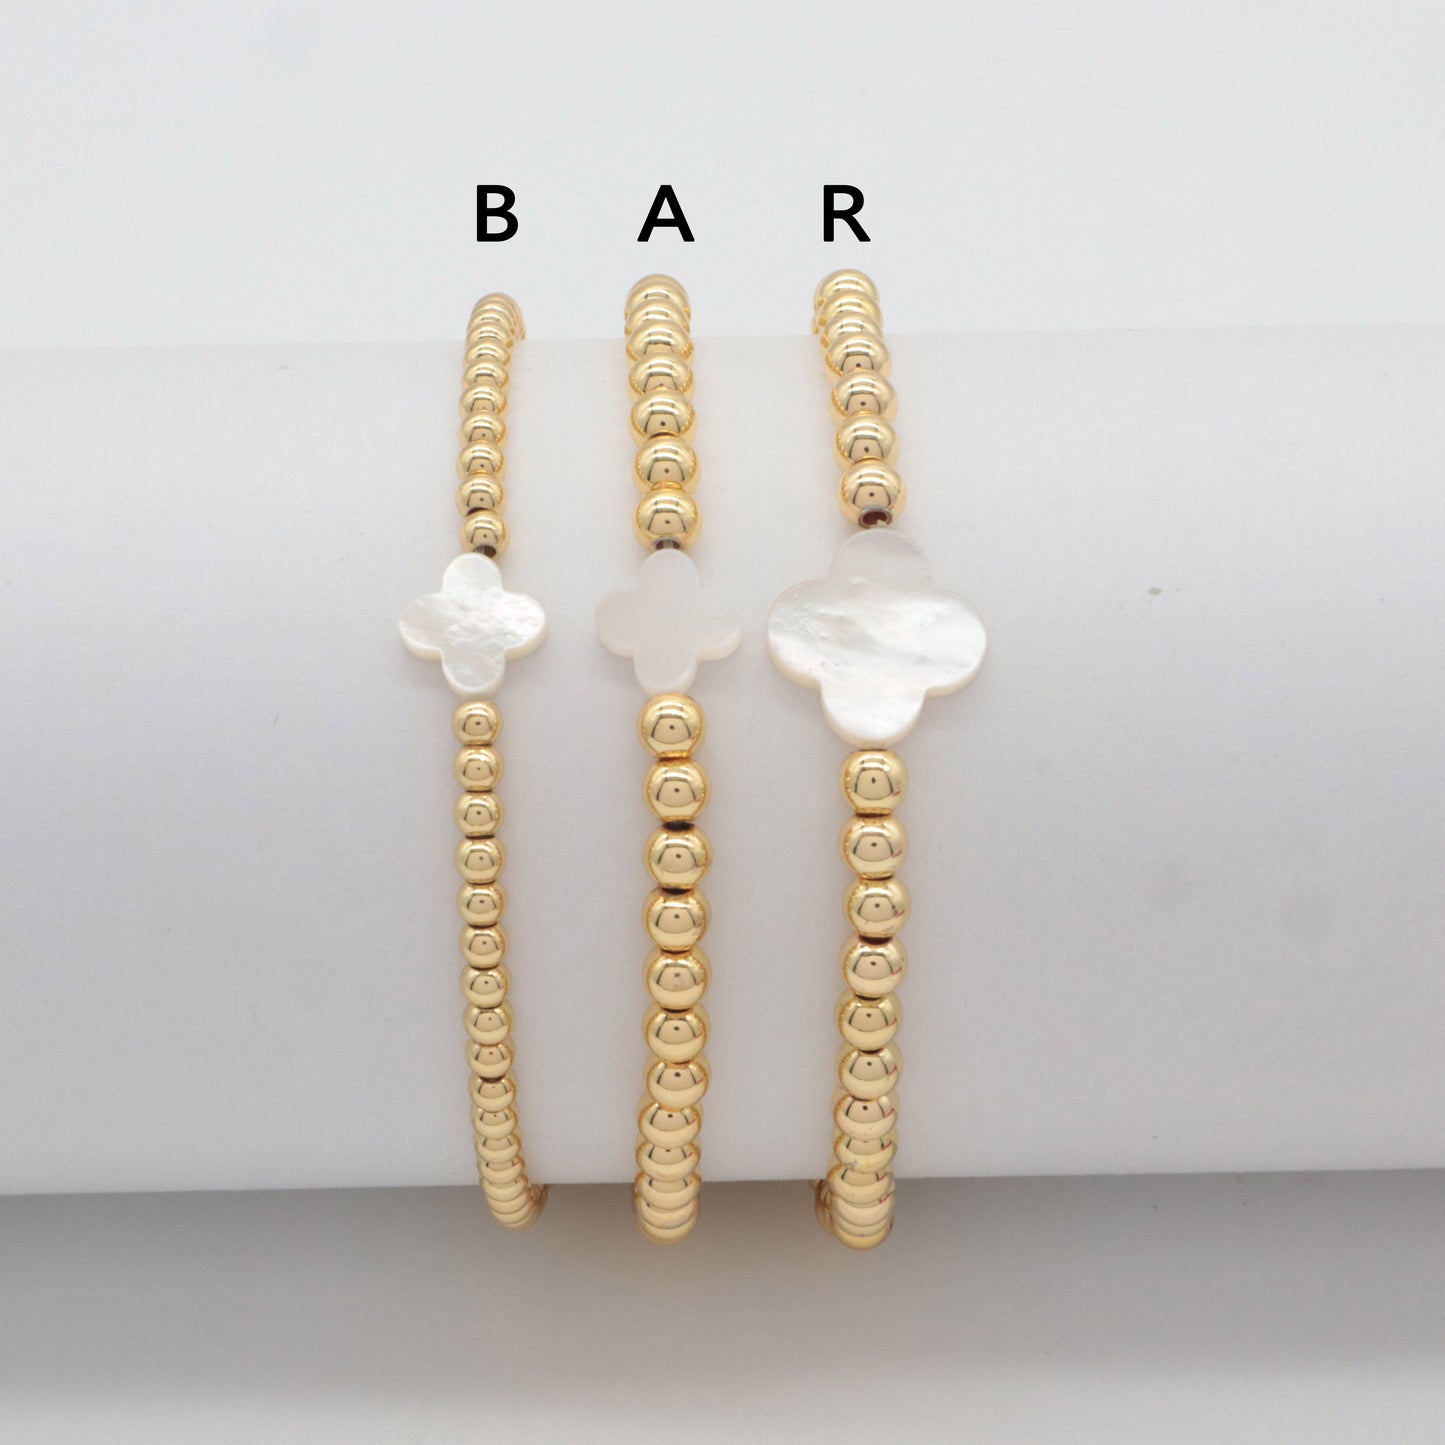 Wholesale Manufacture Newest Factory OEM Customized Handmade Fashionable 4mm Brass Bead Shell Charm Bracelet For Gift Women